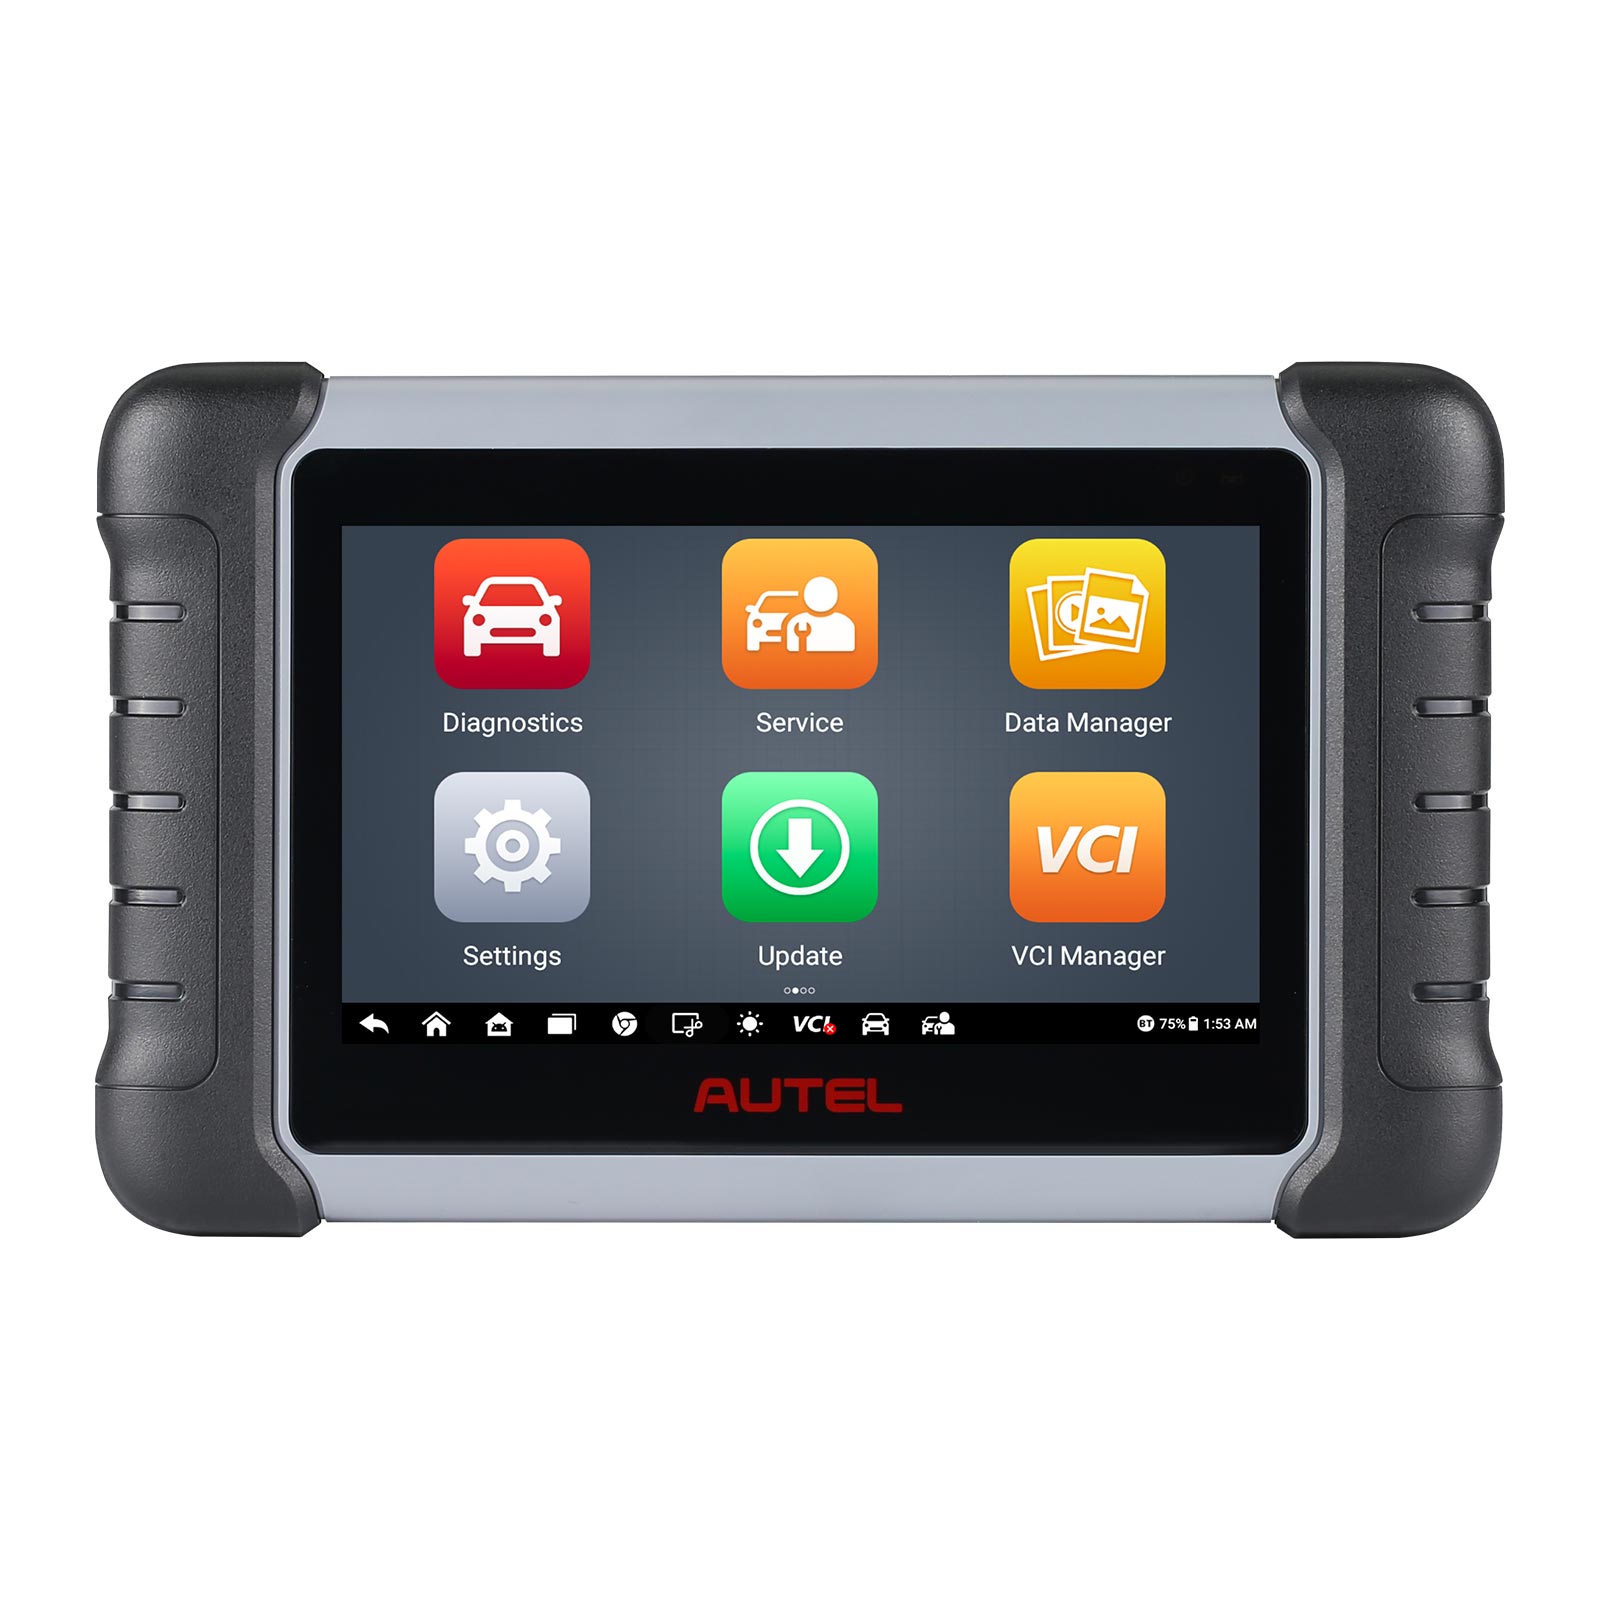 Autel MK808BT PRO Diagnostic Tool Full Bi-Directional control Scanner with  OE-Level All System Diagnostic, 36+ Services